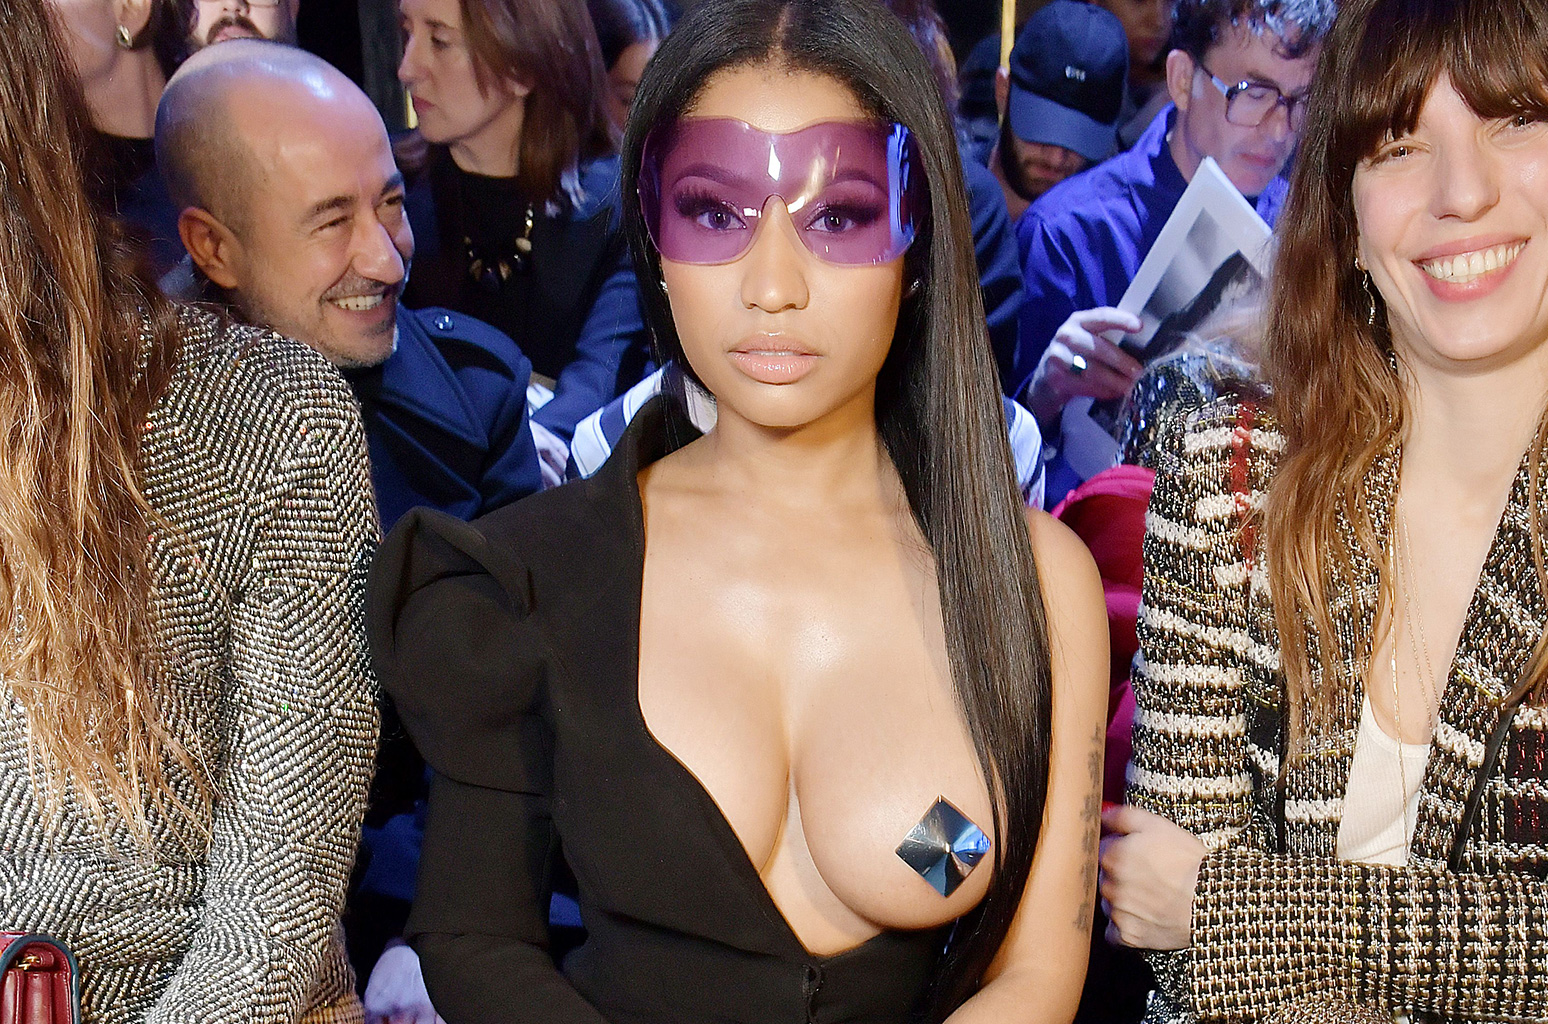 amy moseley recommends nicki minaj shows tits pic